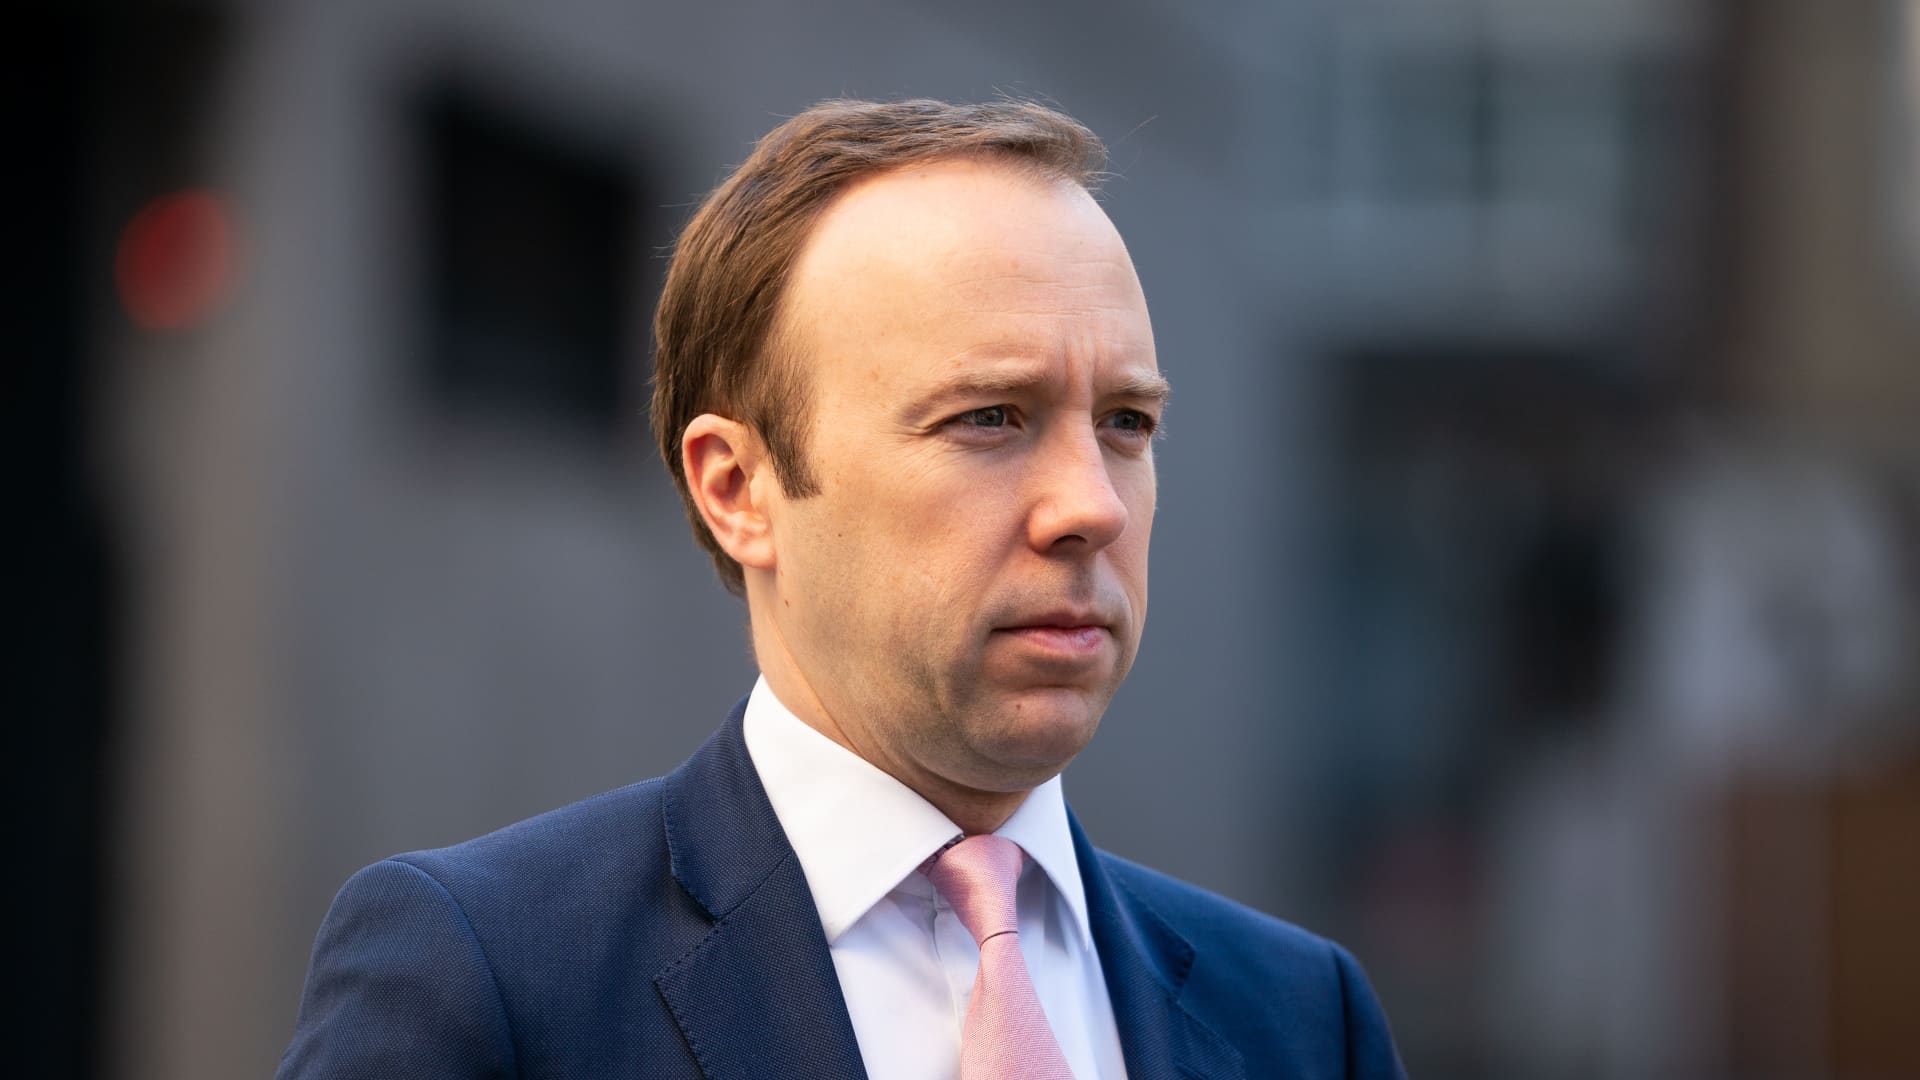 Health Secretary Matt Hancock arrives at BBC Broadcasting House in London to appear on the Andrew Marr show.